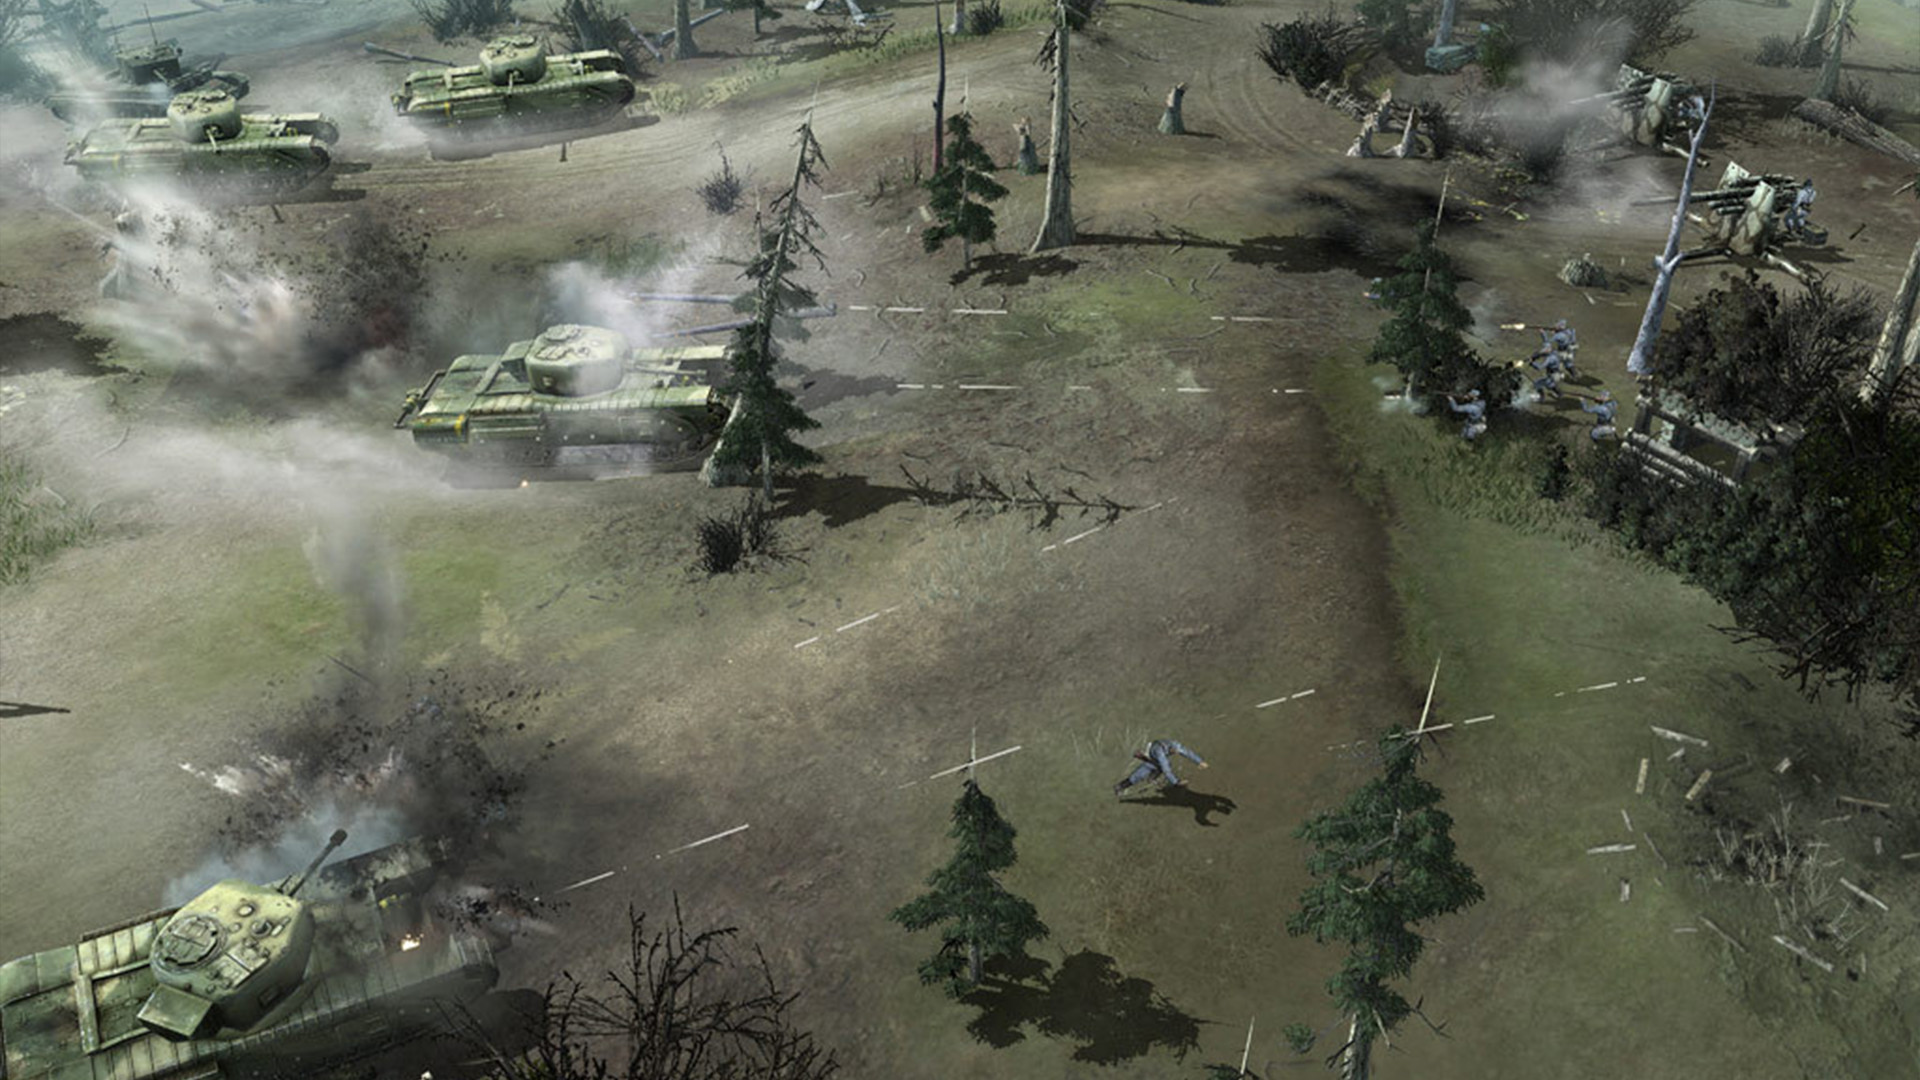 company of heroes opposing front patches